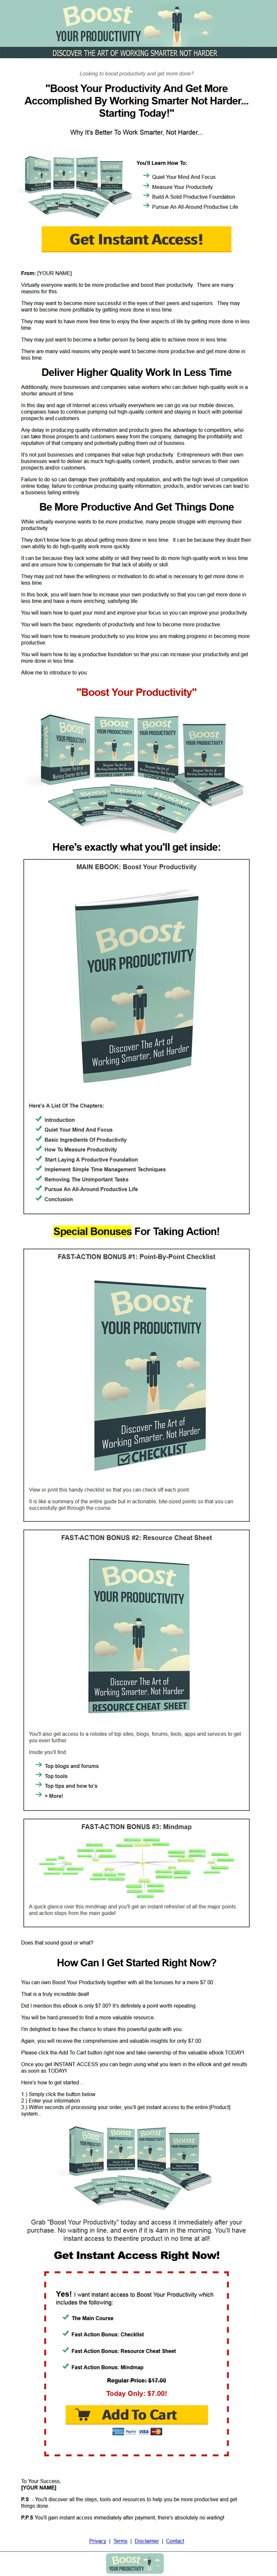 boost your productivity lead generation